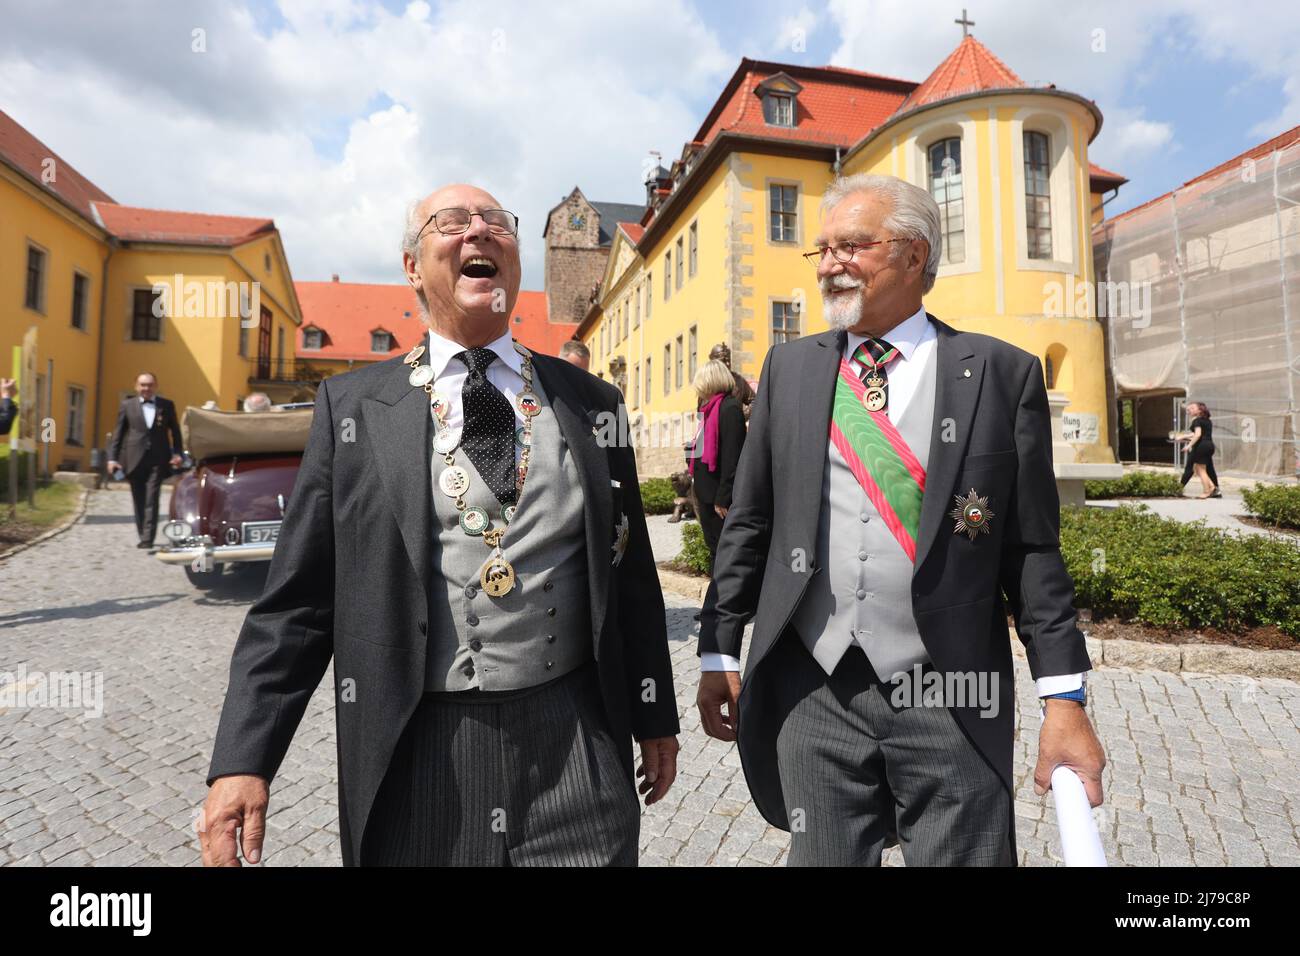 07 May 2022, Saxony-Anhalt, Ballenstedt: Eduard Prince of Anhalt (l) stands next to Karl-Heinz Meyer, treasurer of the Askan House Order, in front of Ballenstedt Castle. The duke celebrates his 80th birthday in Ballenstedt. At the same time the investiture took place. In the context of the Investiture, persons are honored annually for special achievements by the Askanian House Order 'Albrecht the Bear'. The investiture takes place in the presence of Eduard Prince of Anhalt. Photo: Matthias Bein/dpa/ZB Stock Photo